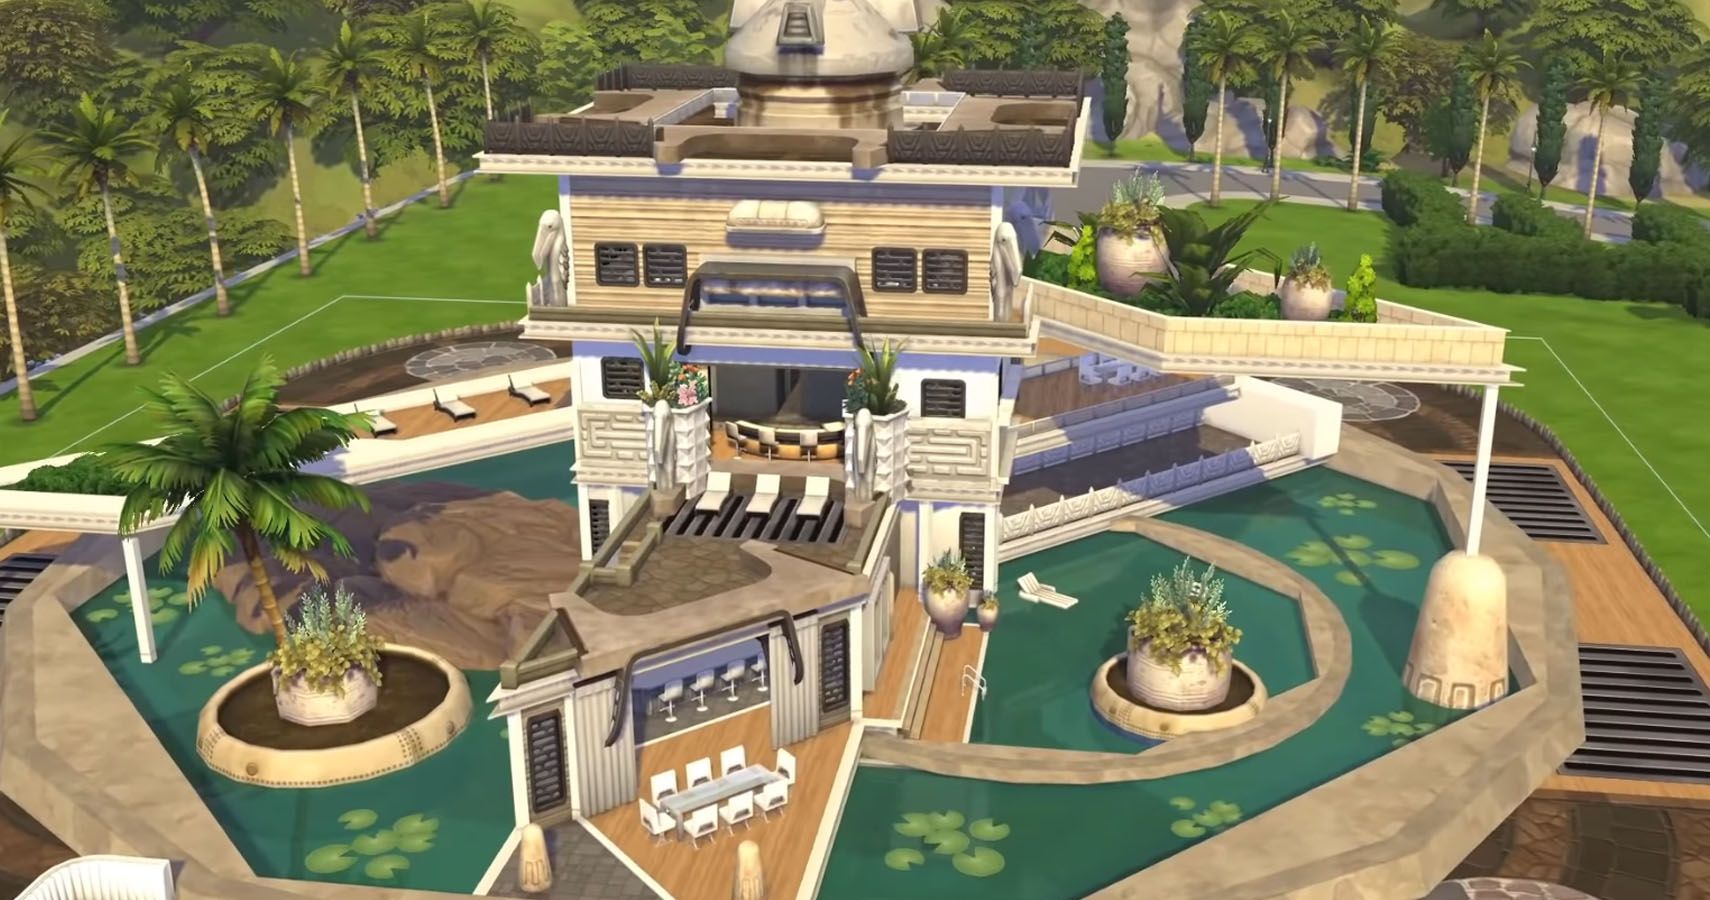 A large dystopian looking mansion in Del Sol VAlley in TS4 using Star Wars items.